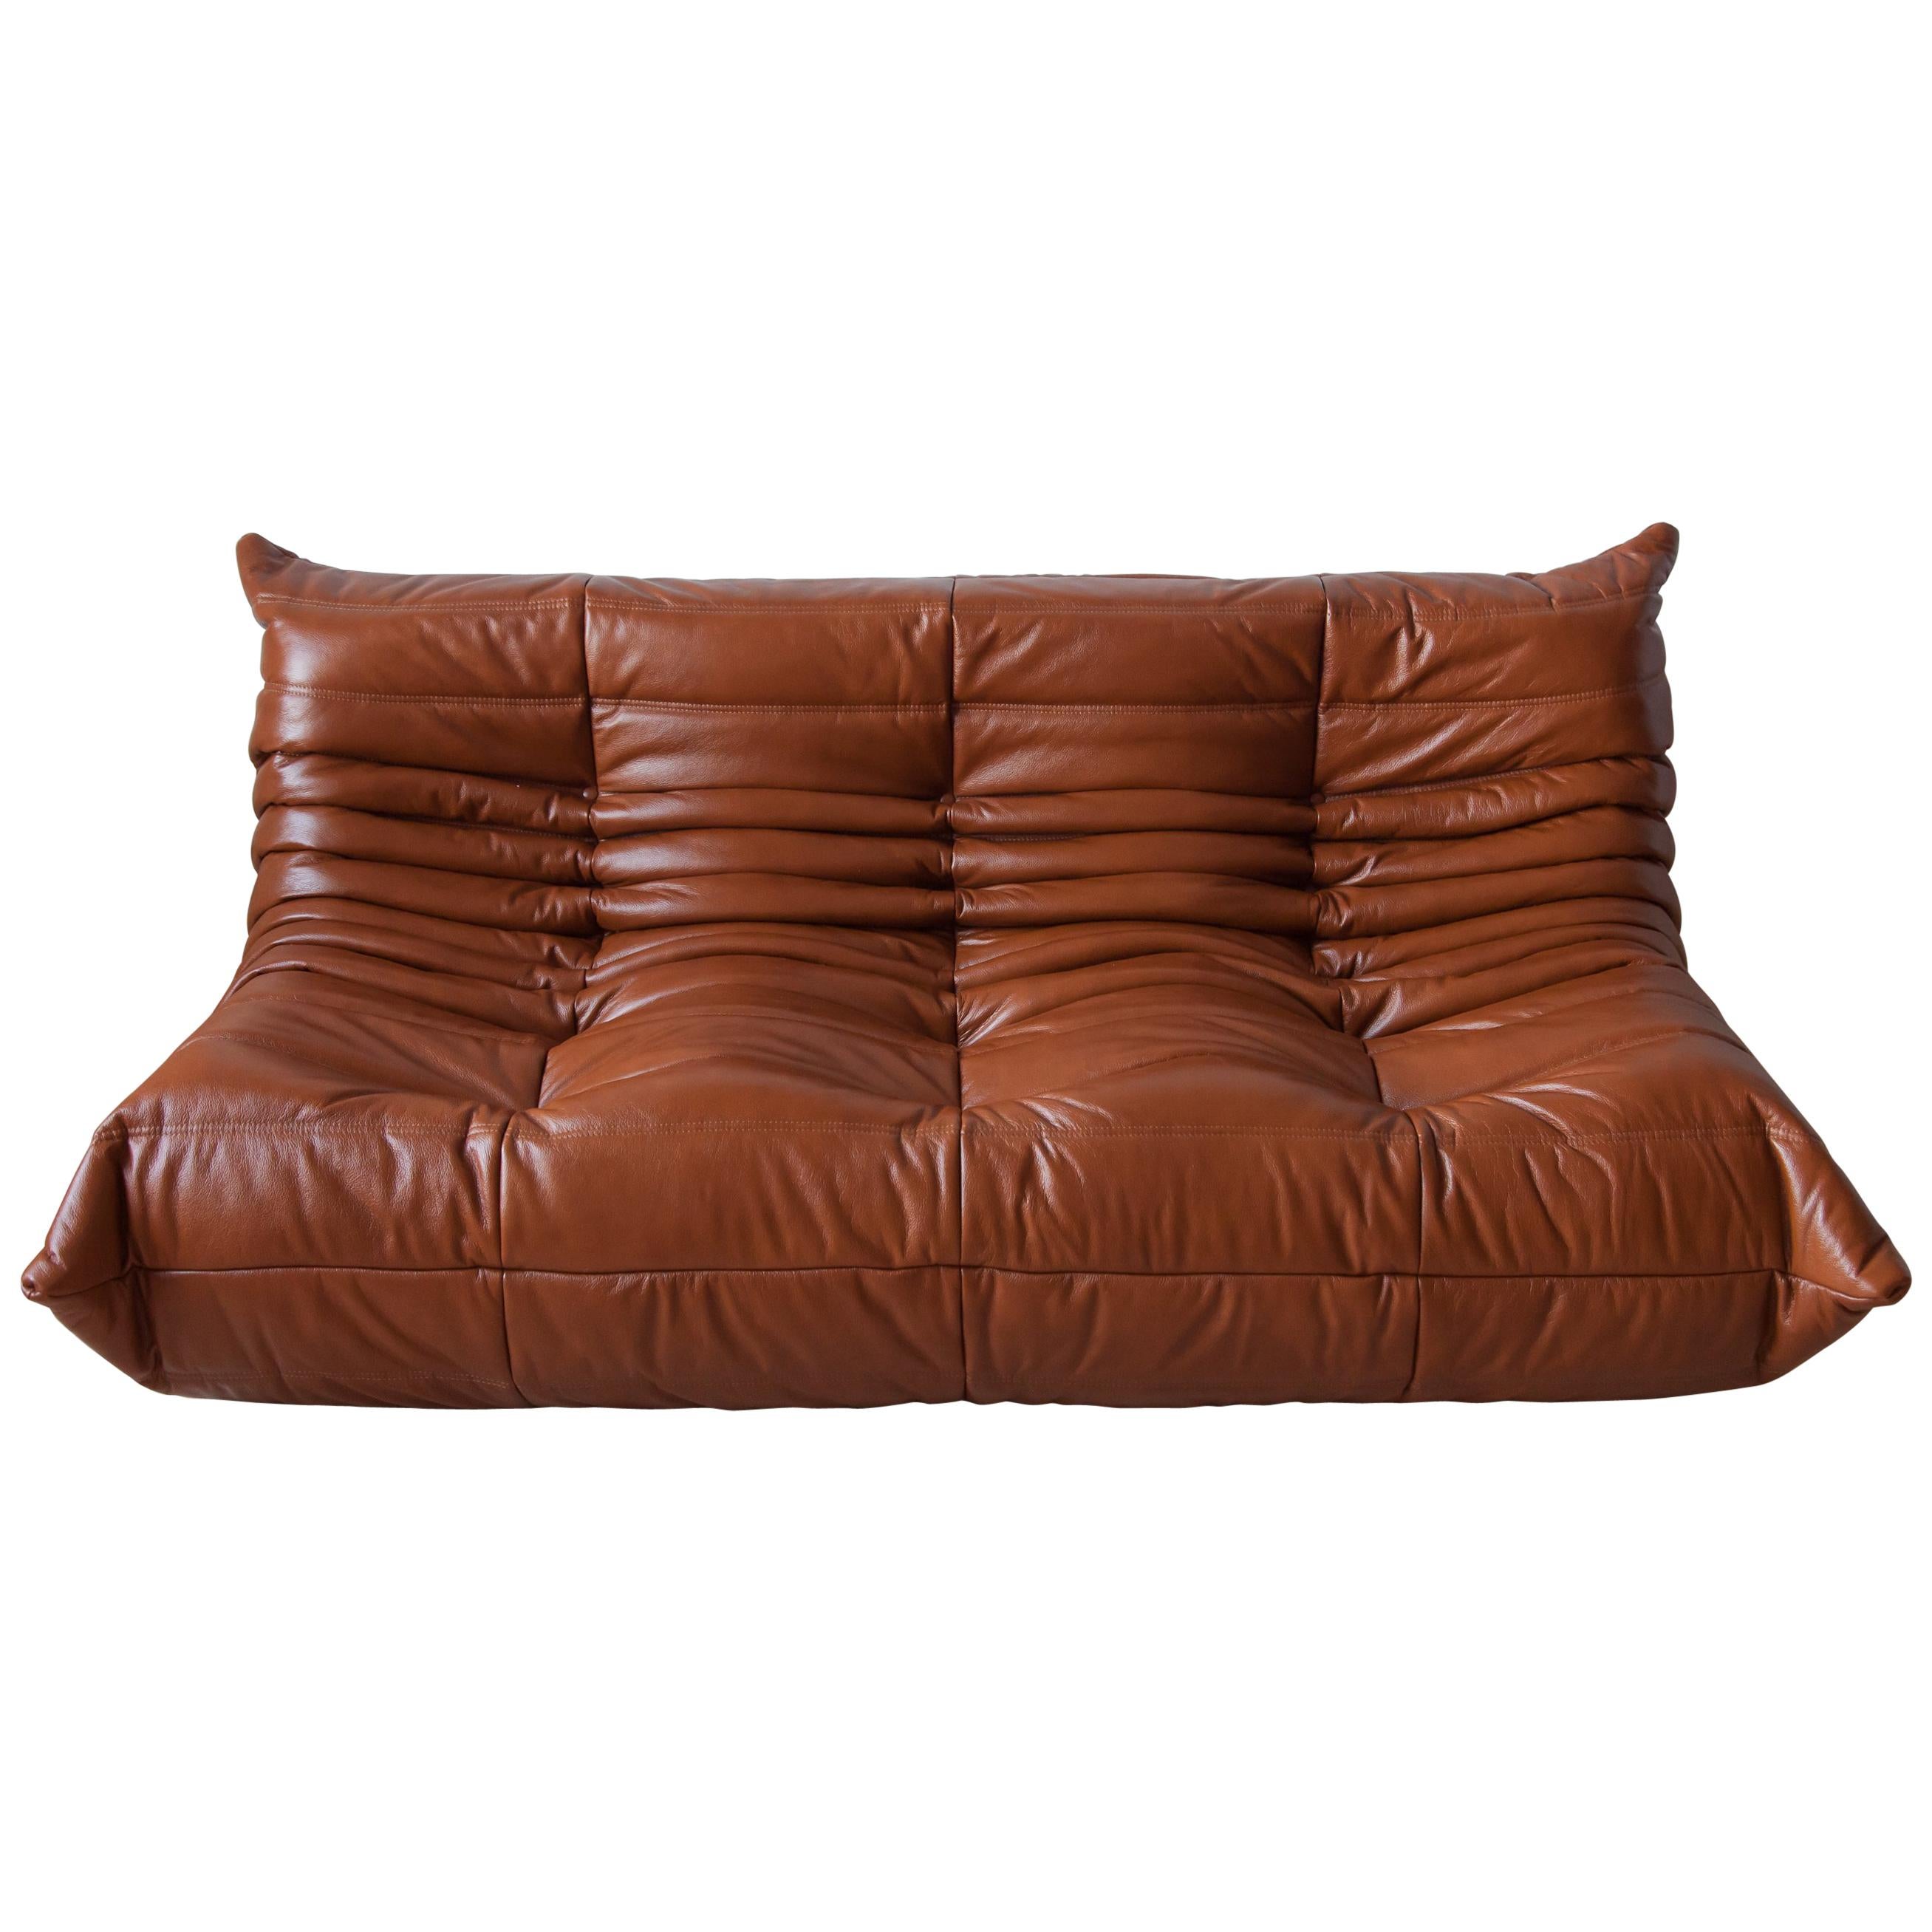 Togo 3-Seat Sofa in Whiskey Leather by Michel Ducaroy for Ligne Roset For Sale